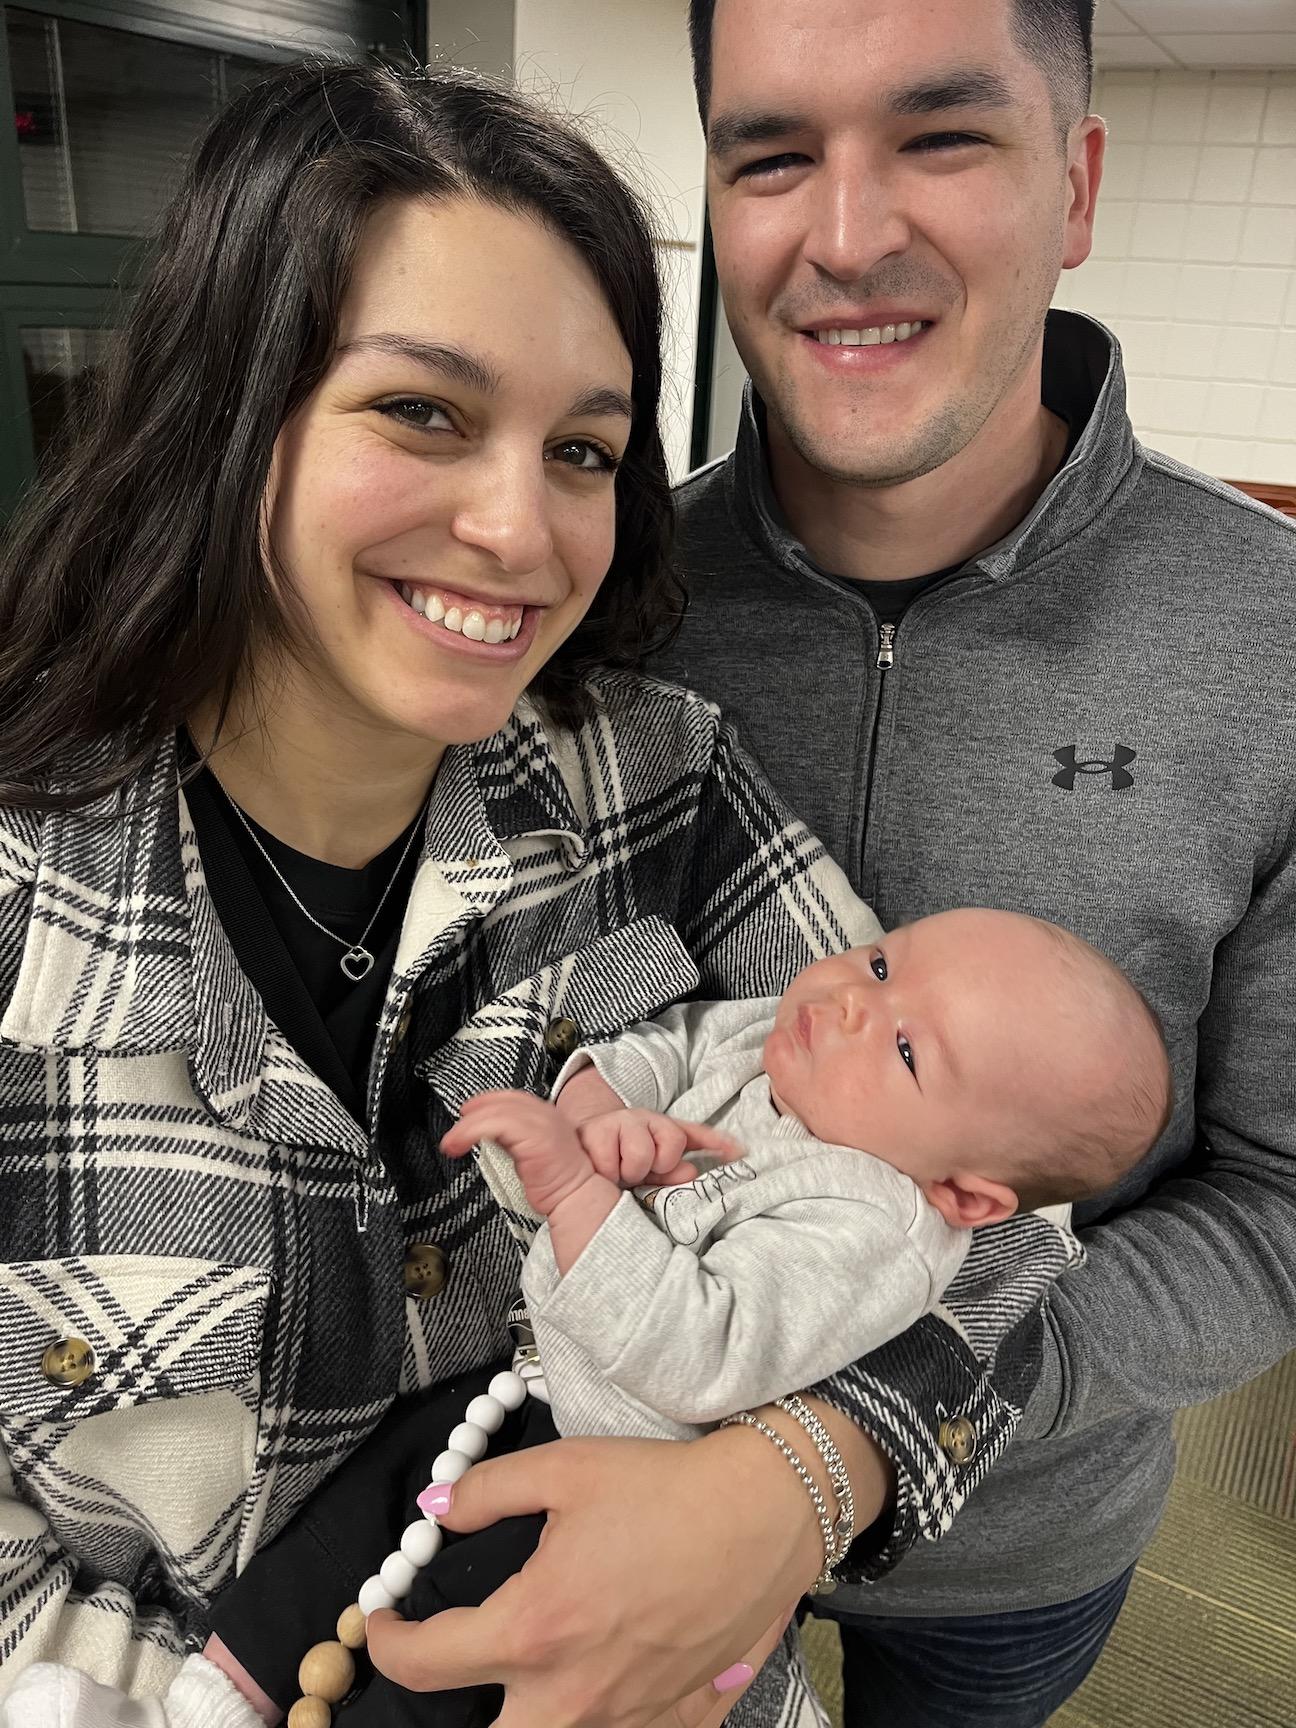 Alexis and Dan Simon with their infant son, Dominic